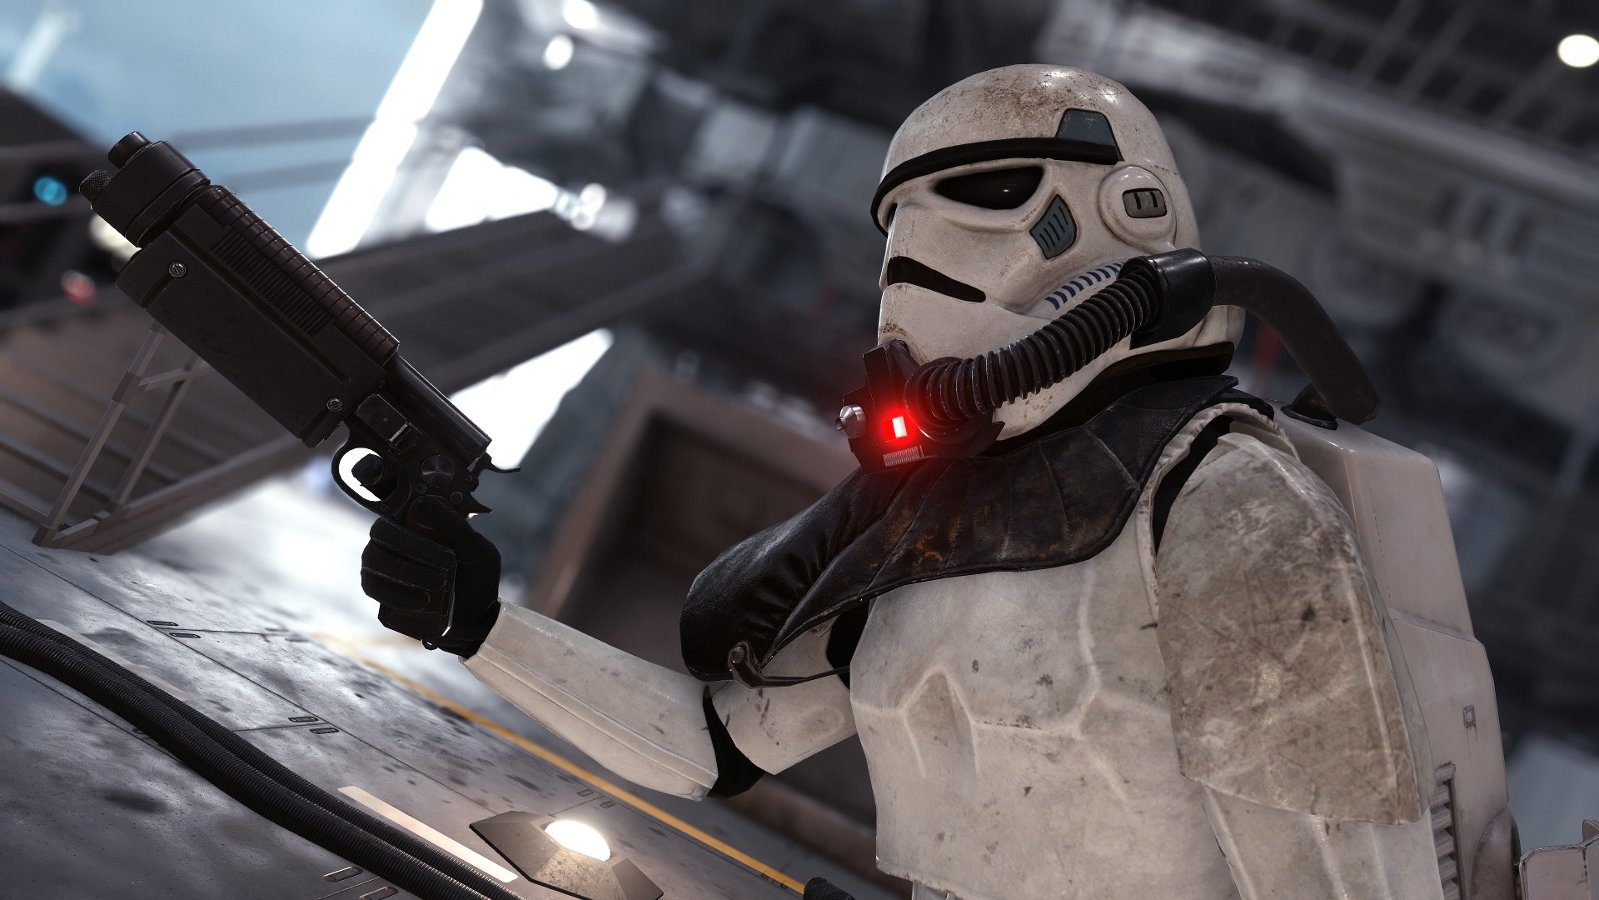 A stormtrooper with the Bryar Pistol in Battlefront.